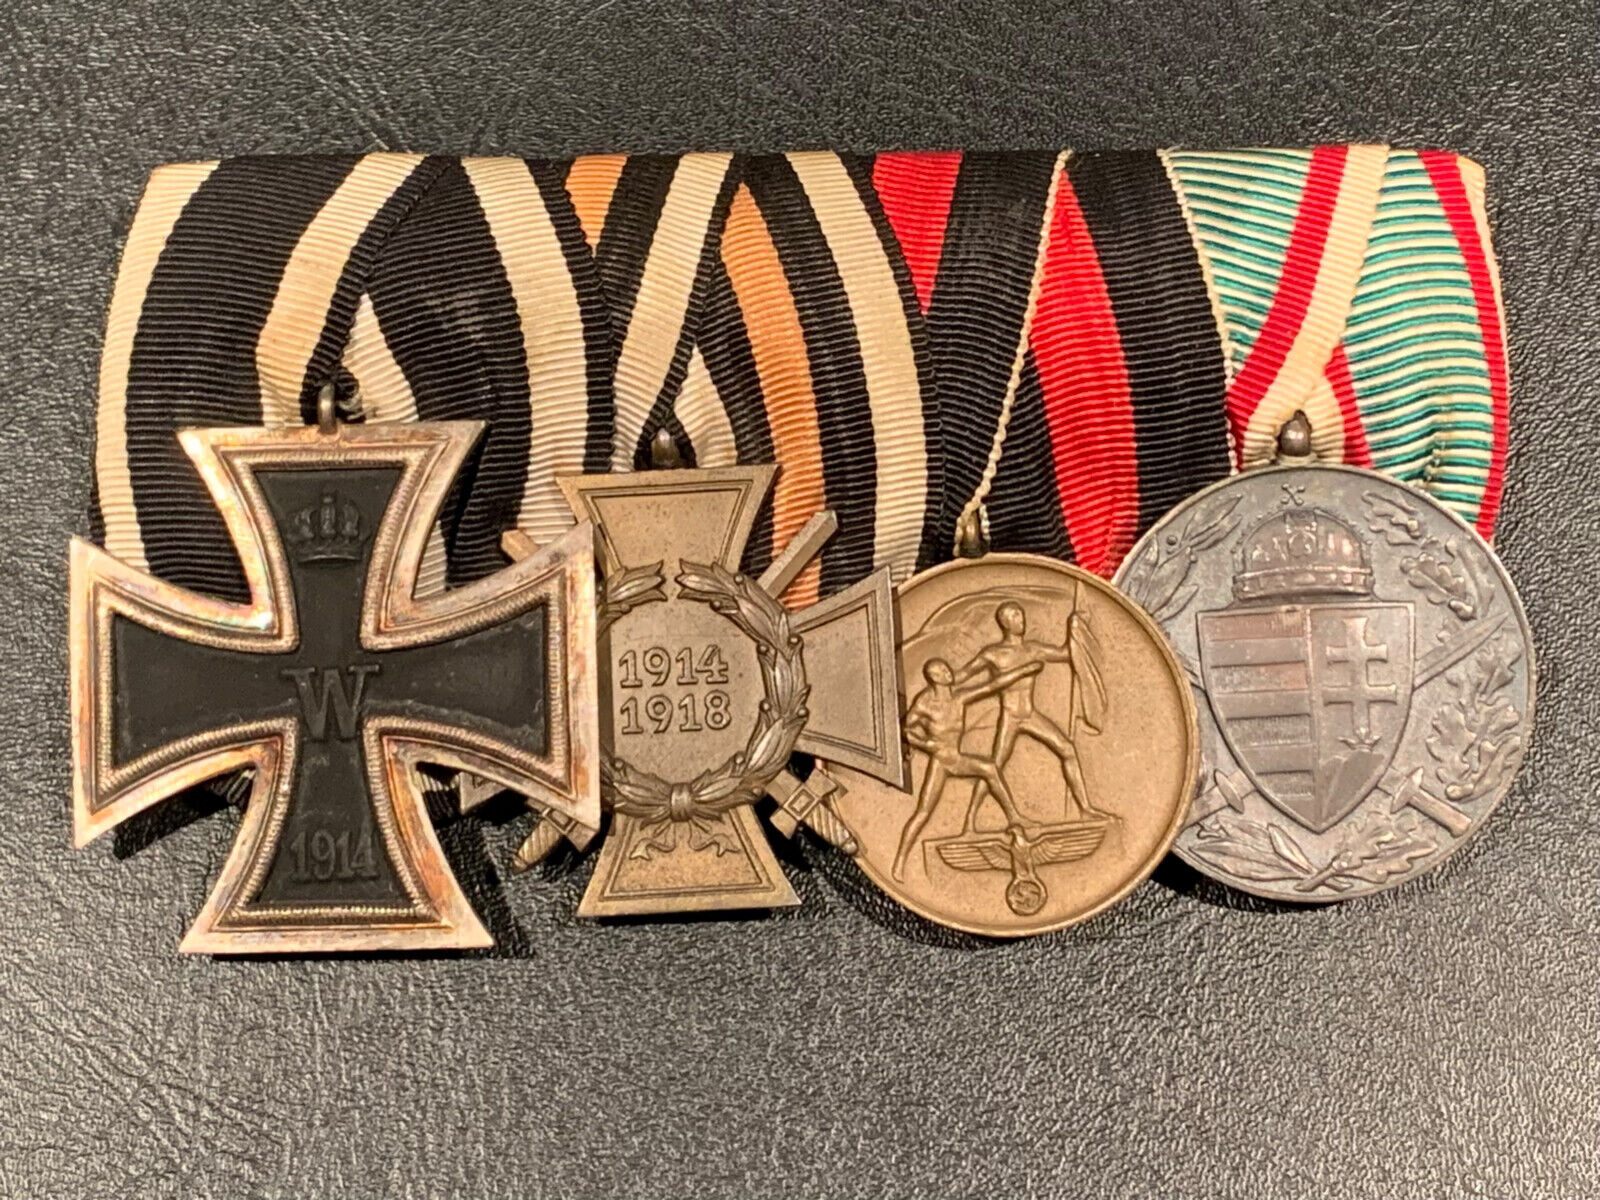 Imperial German Original Military Medals Bar (Group of 4 Medals)